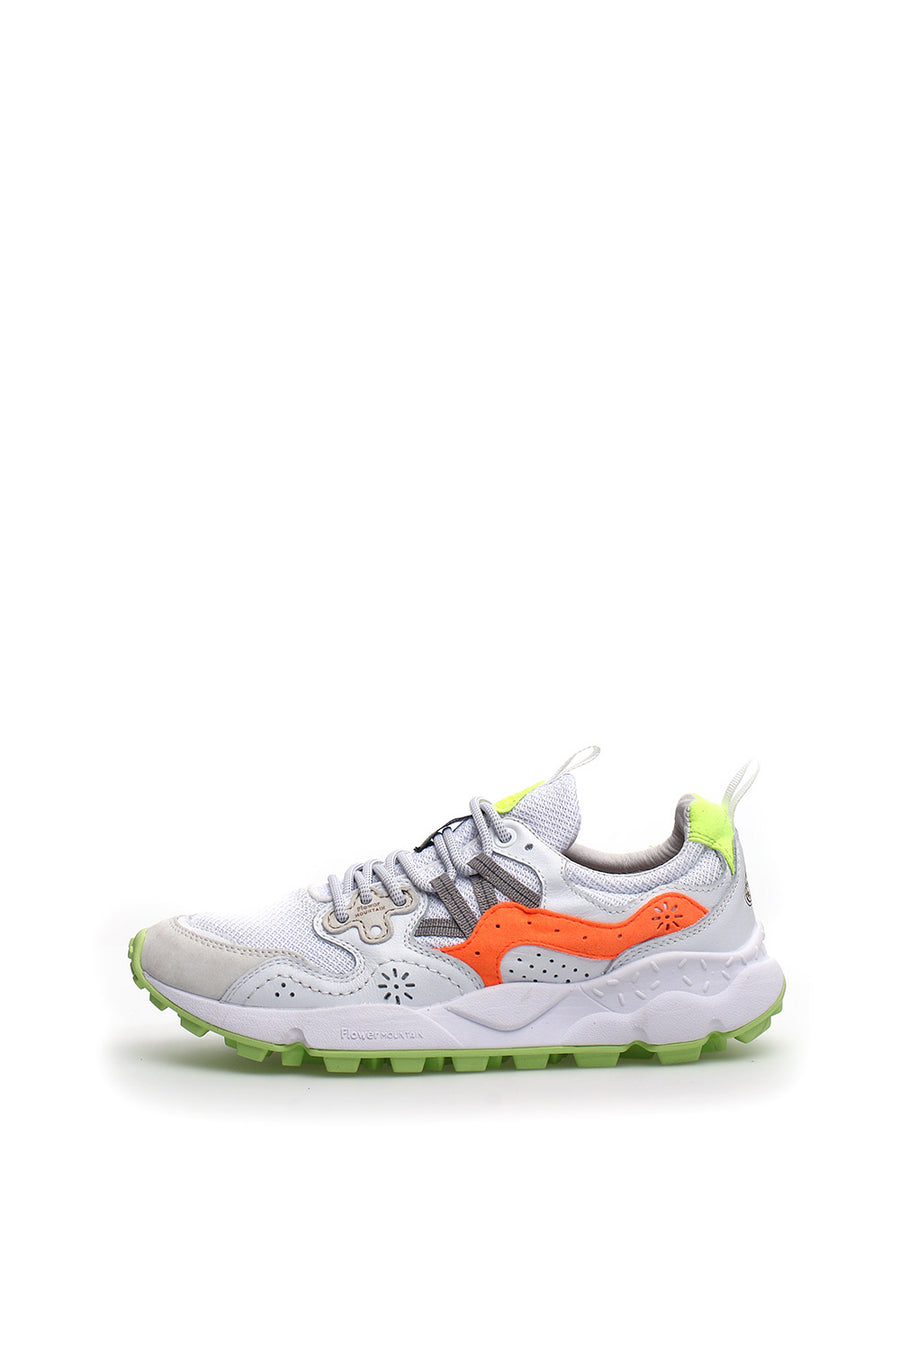 Sneakers Flower Mountain in suede e  mesh color white fluo  Yamano 3